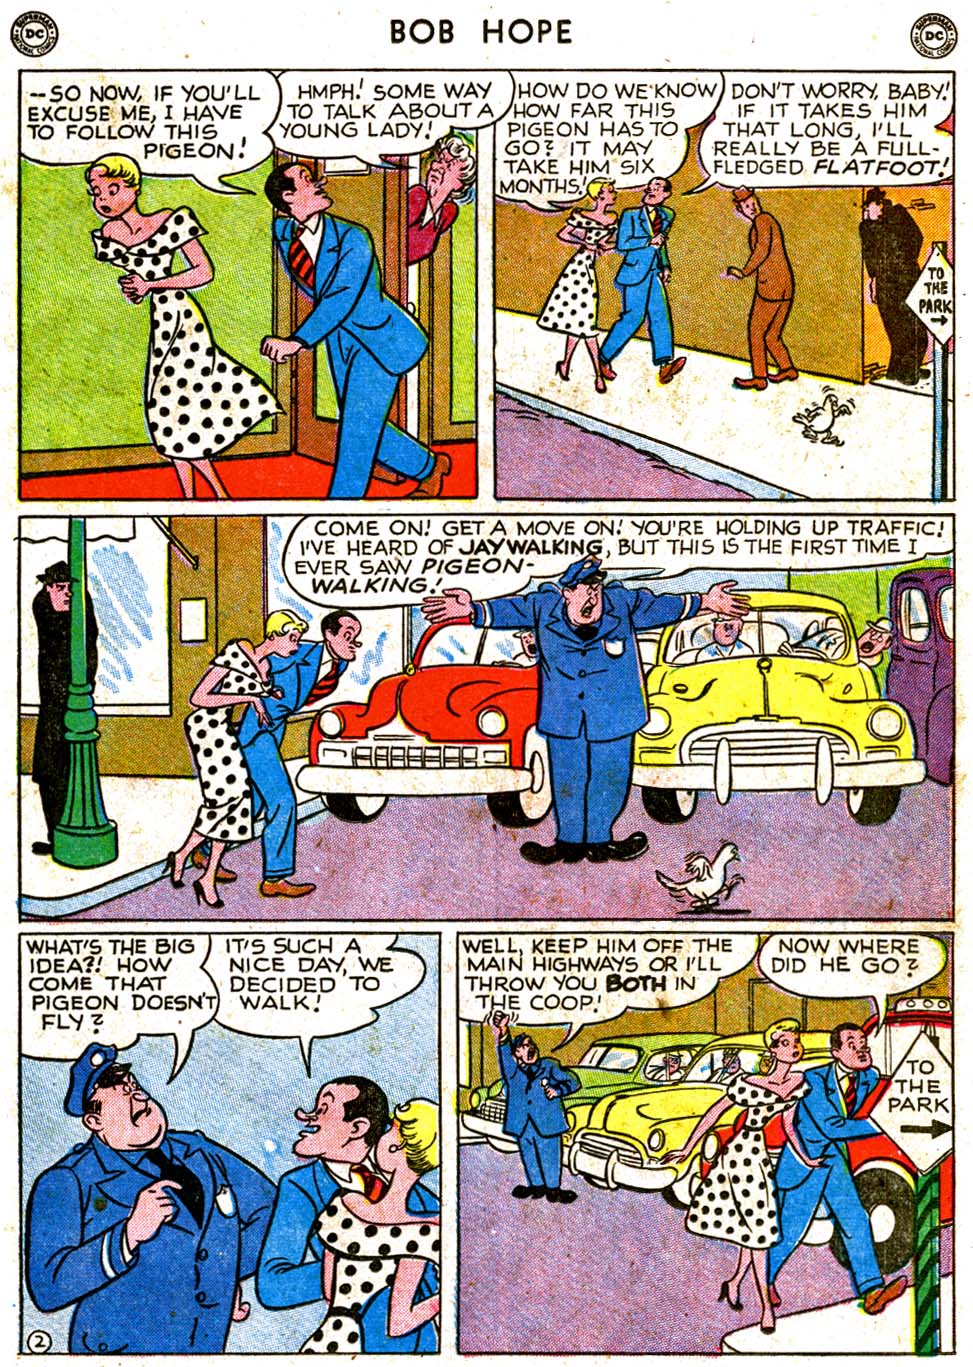 Read online The Adventures of Bob Hope comic -  Issue #4 - 33